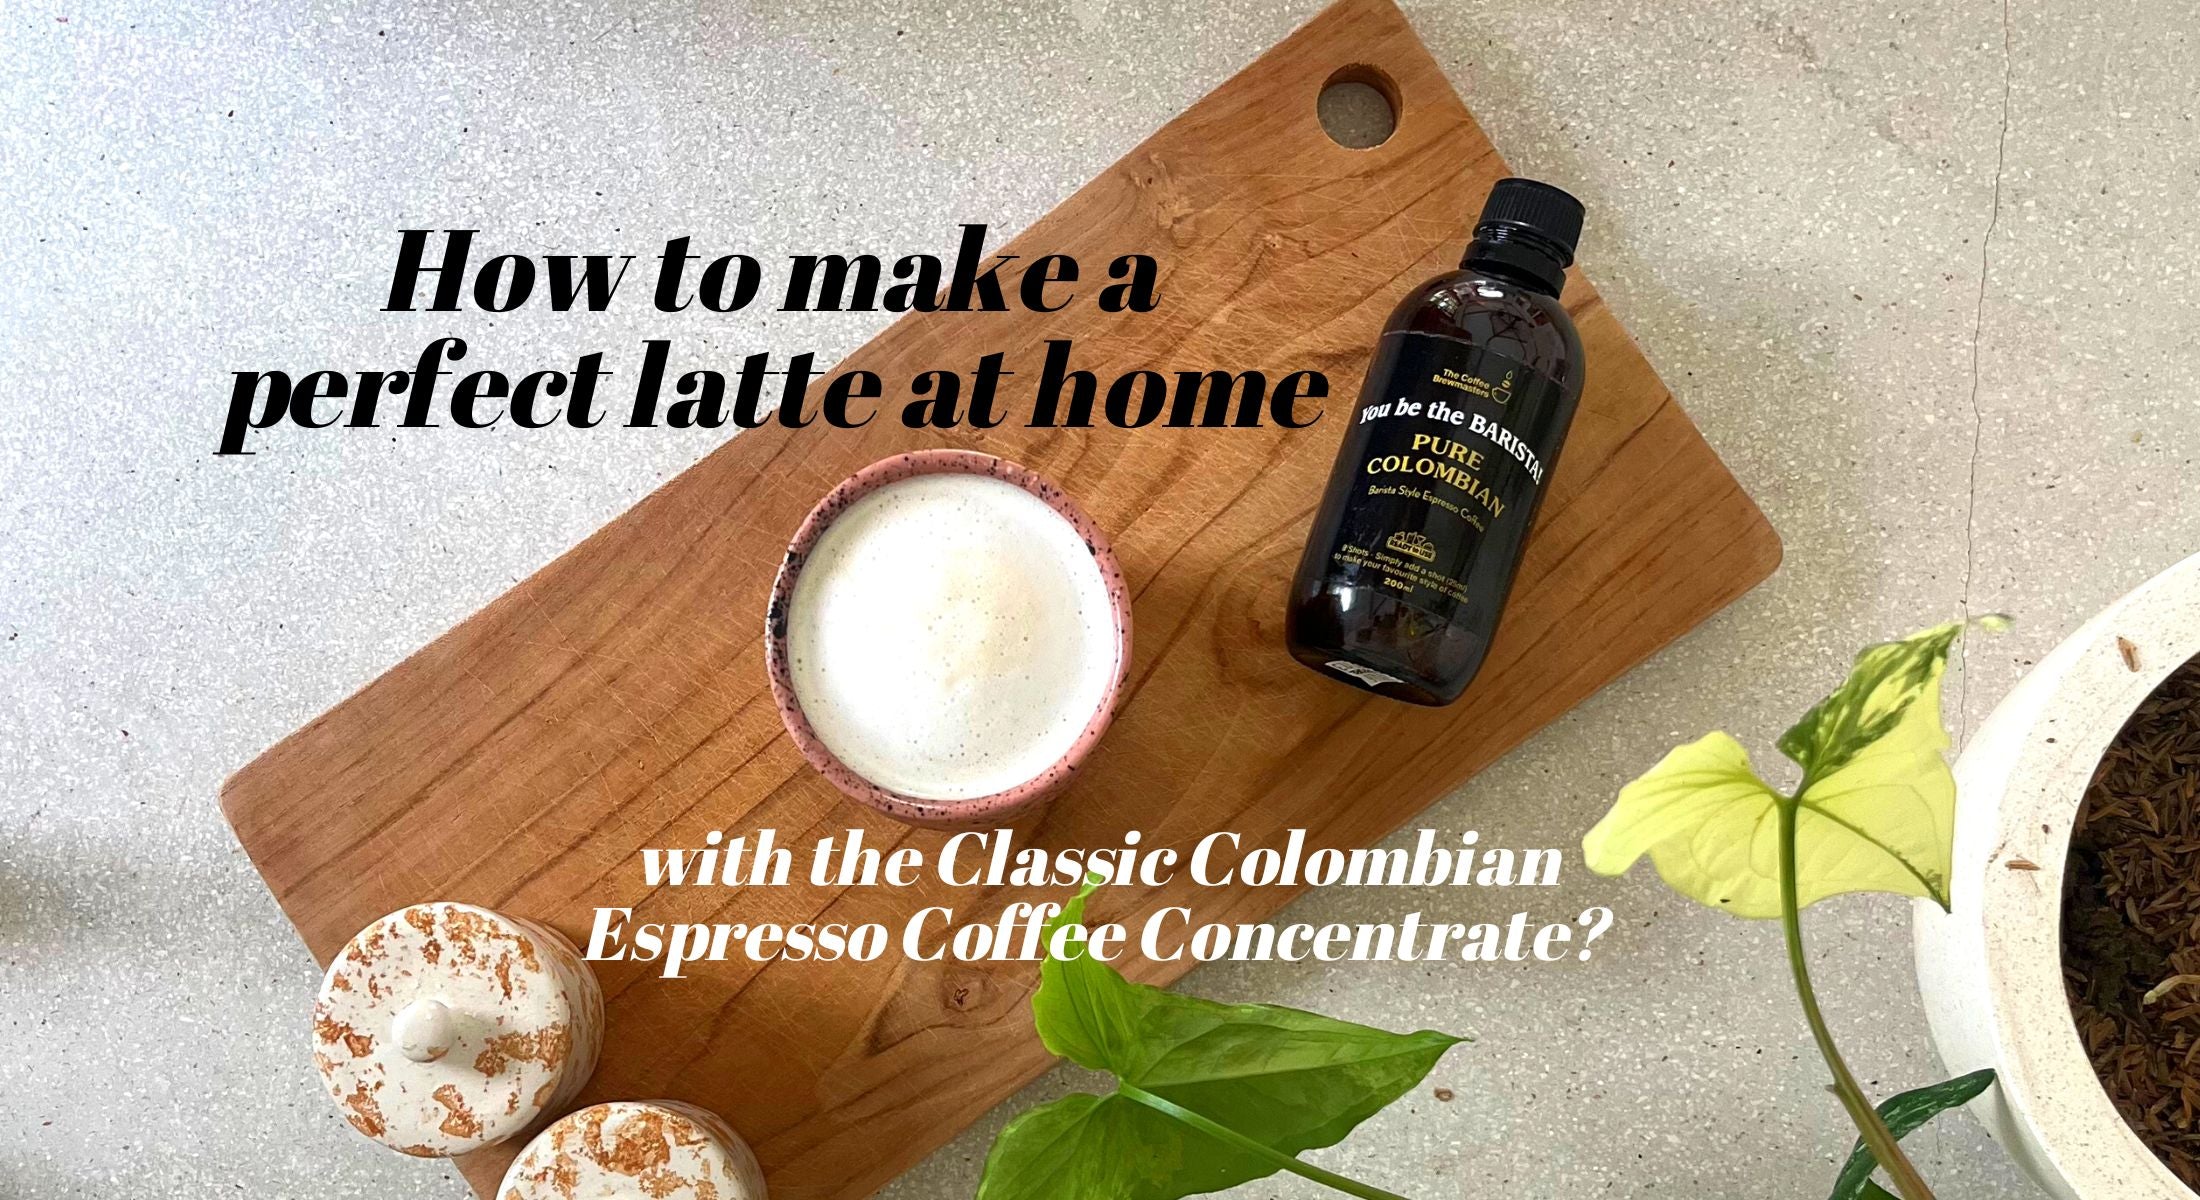 How to Make Barista-Style Coffee At Home